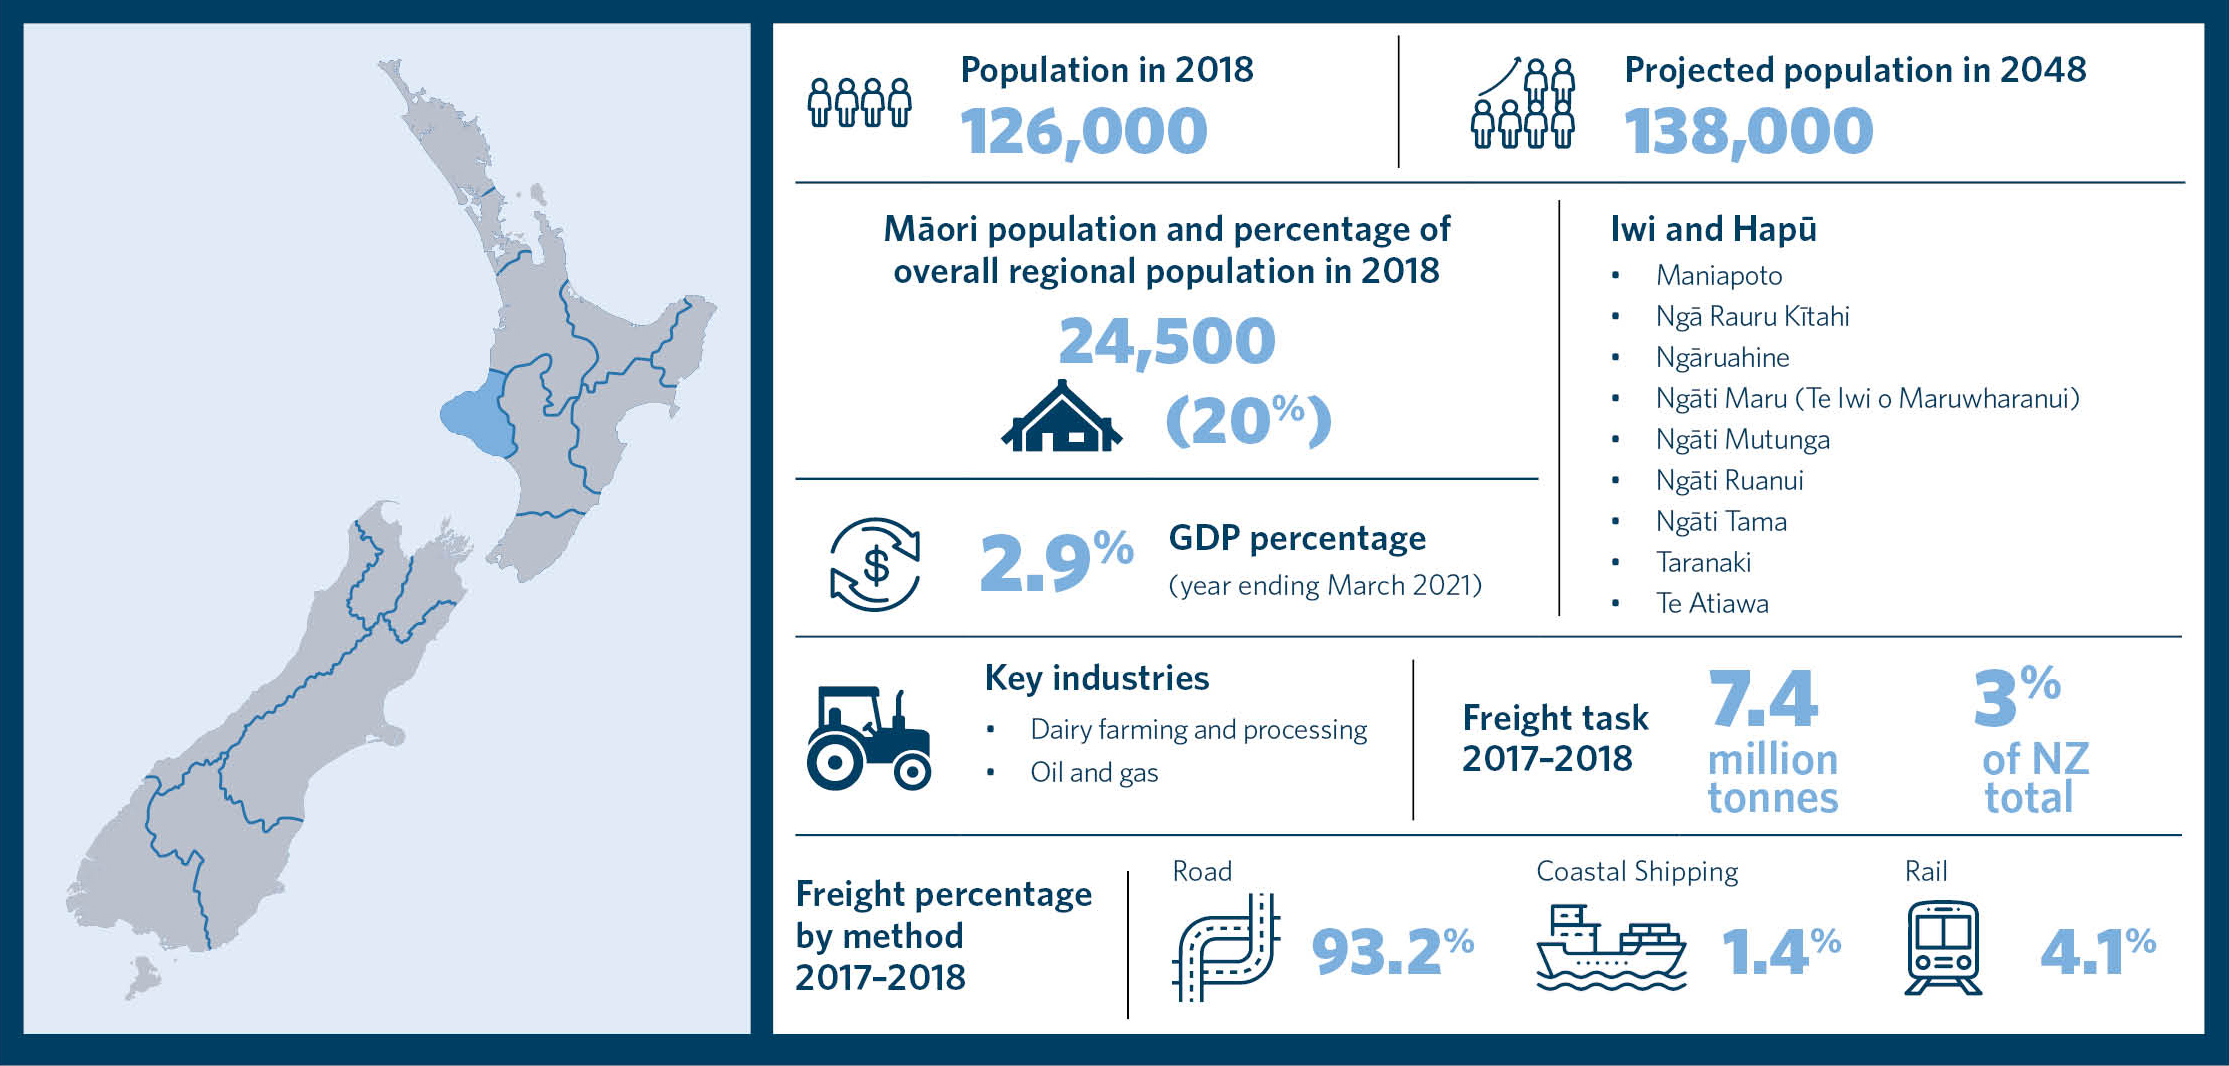 This is an infographic showing statistics for the region of Taranaki. It includes information about the population in 2018, projected population in 2048, Māori population and percentage of overall regional population in 2018, a list of iwi and hapu, GDP p